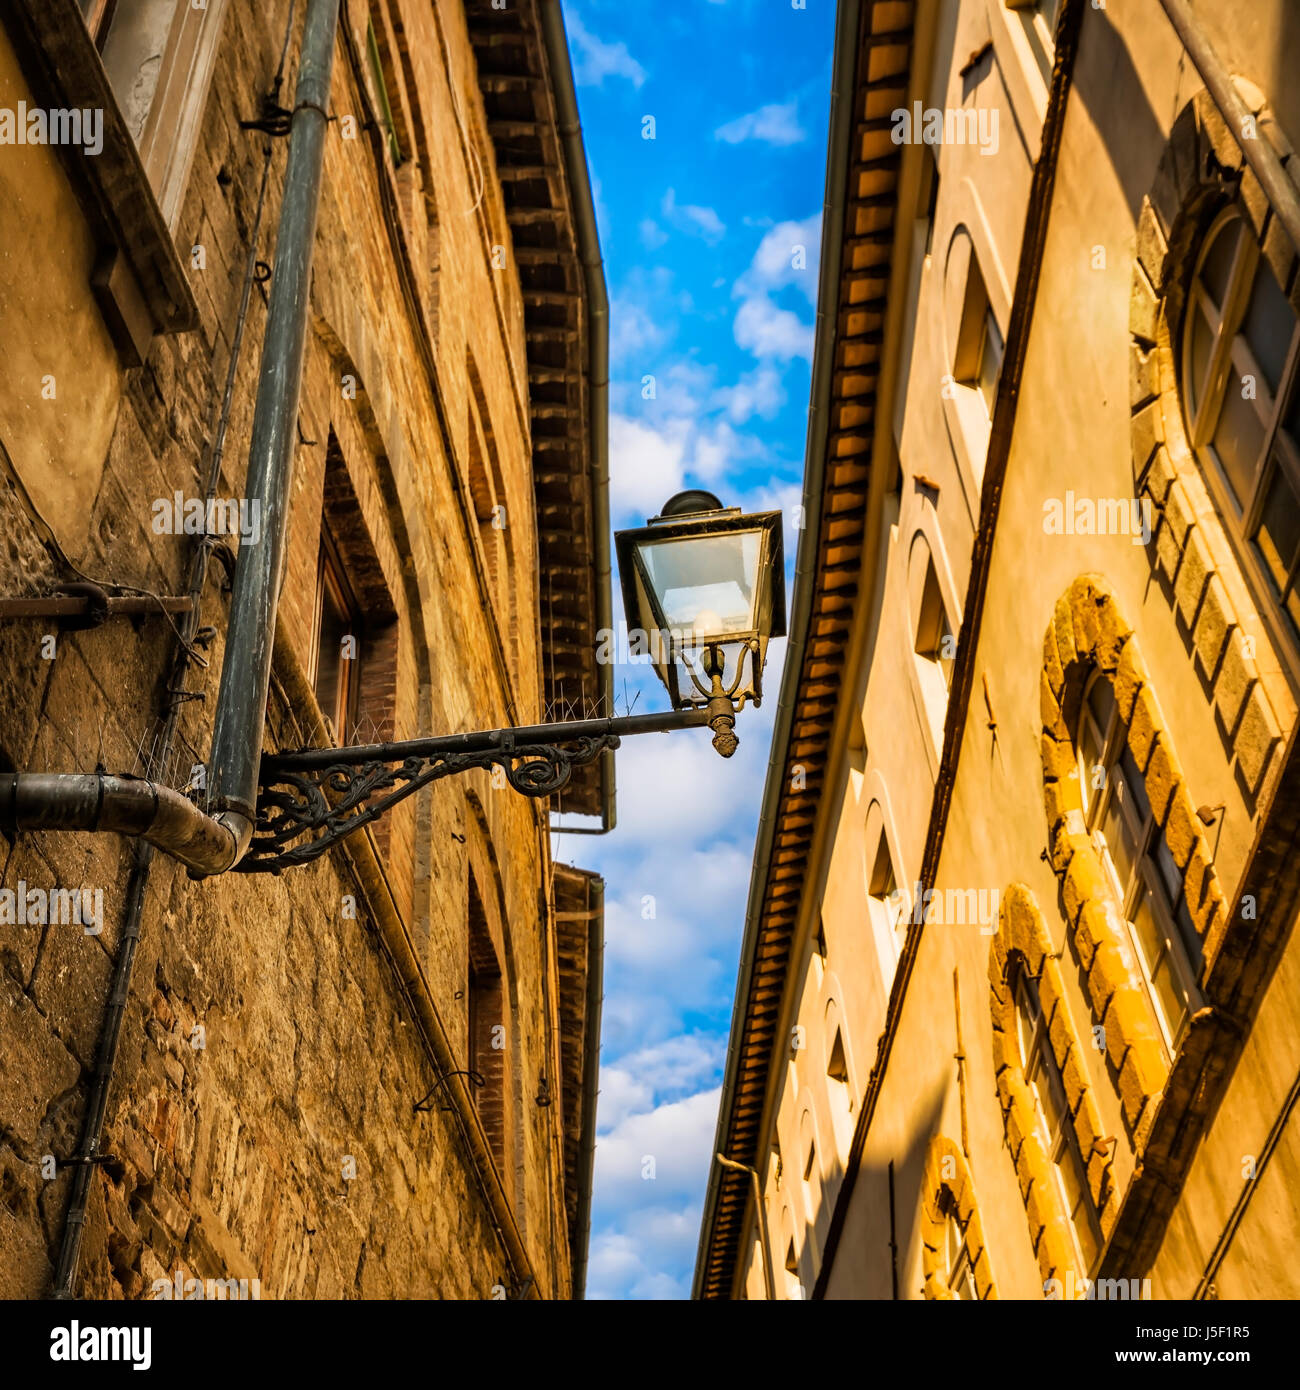 Tuscany urban abstract. Street lamp, red yellow orange traditional house facades and sky background. Bottom view Stock Photo